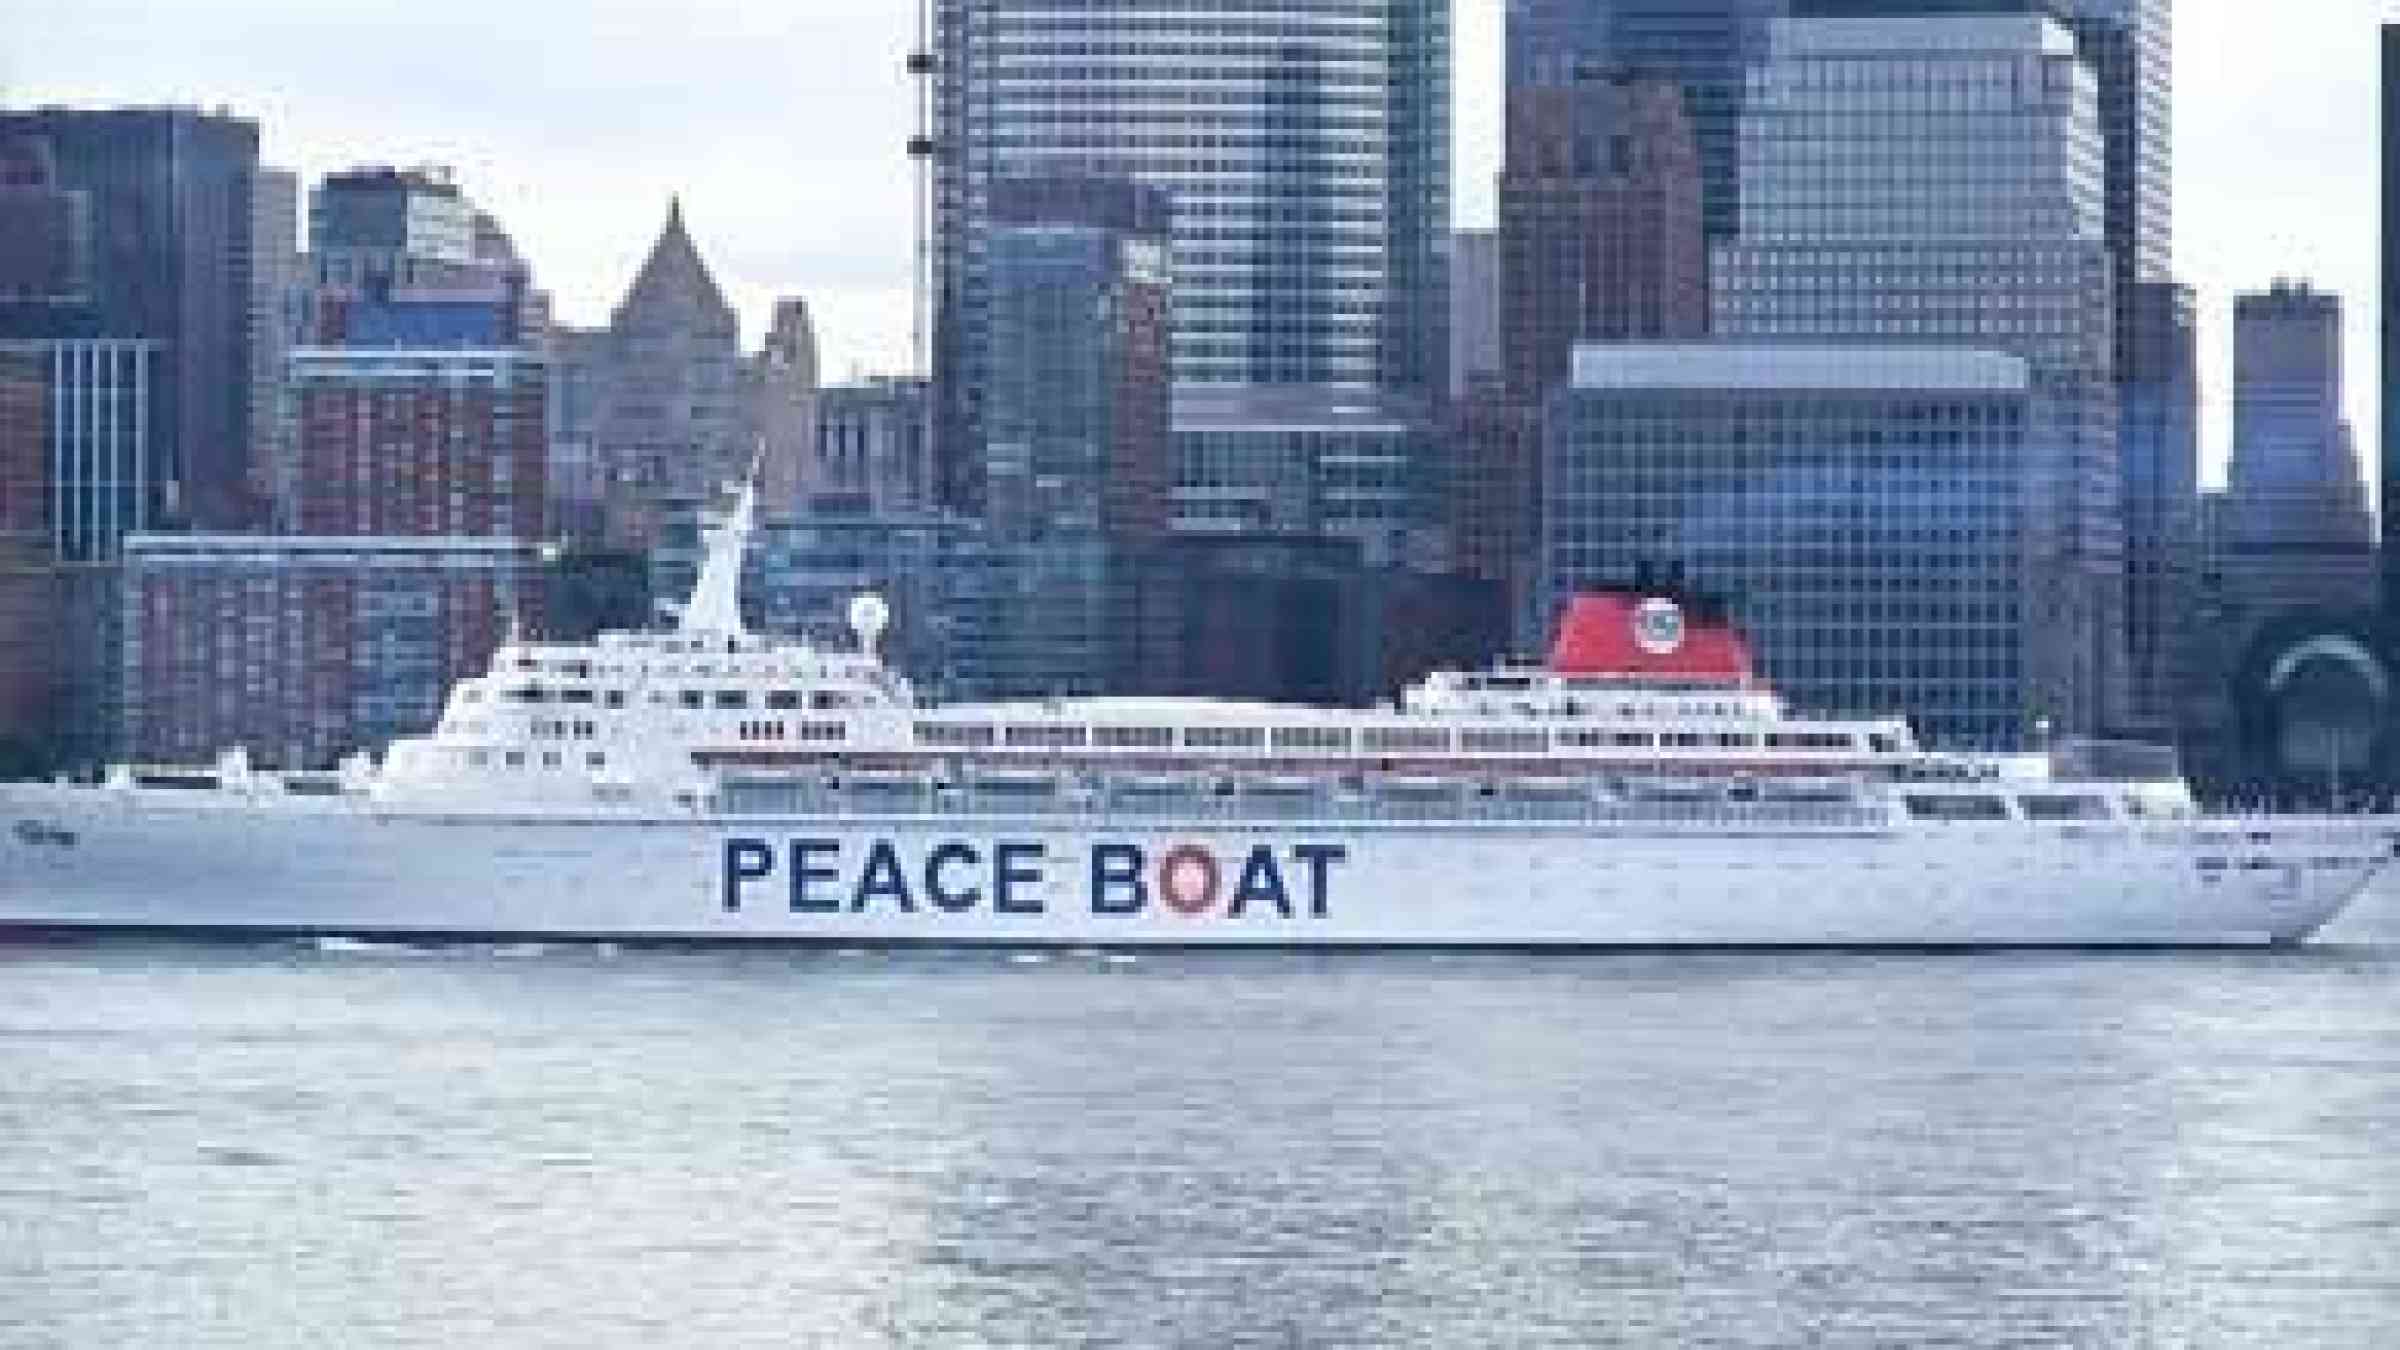 photo of Peace Boat in NYC by flickr user by  Dan DeLuca, https://www.flickr.com/photos/dandeluca/3663335705, CC BY 2.0